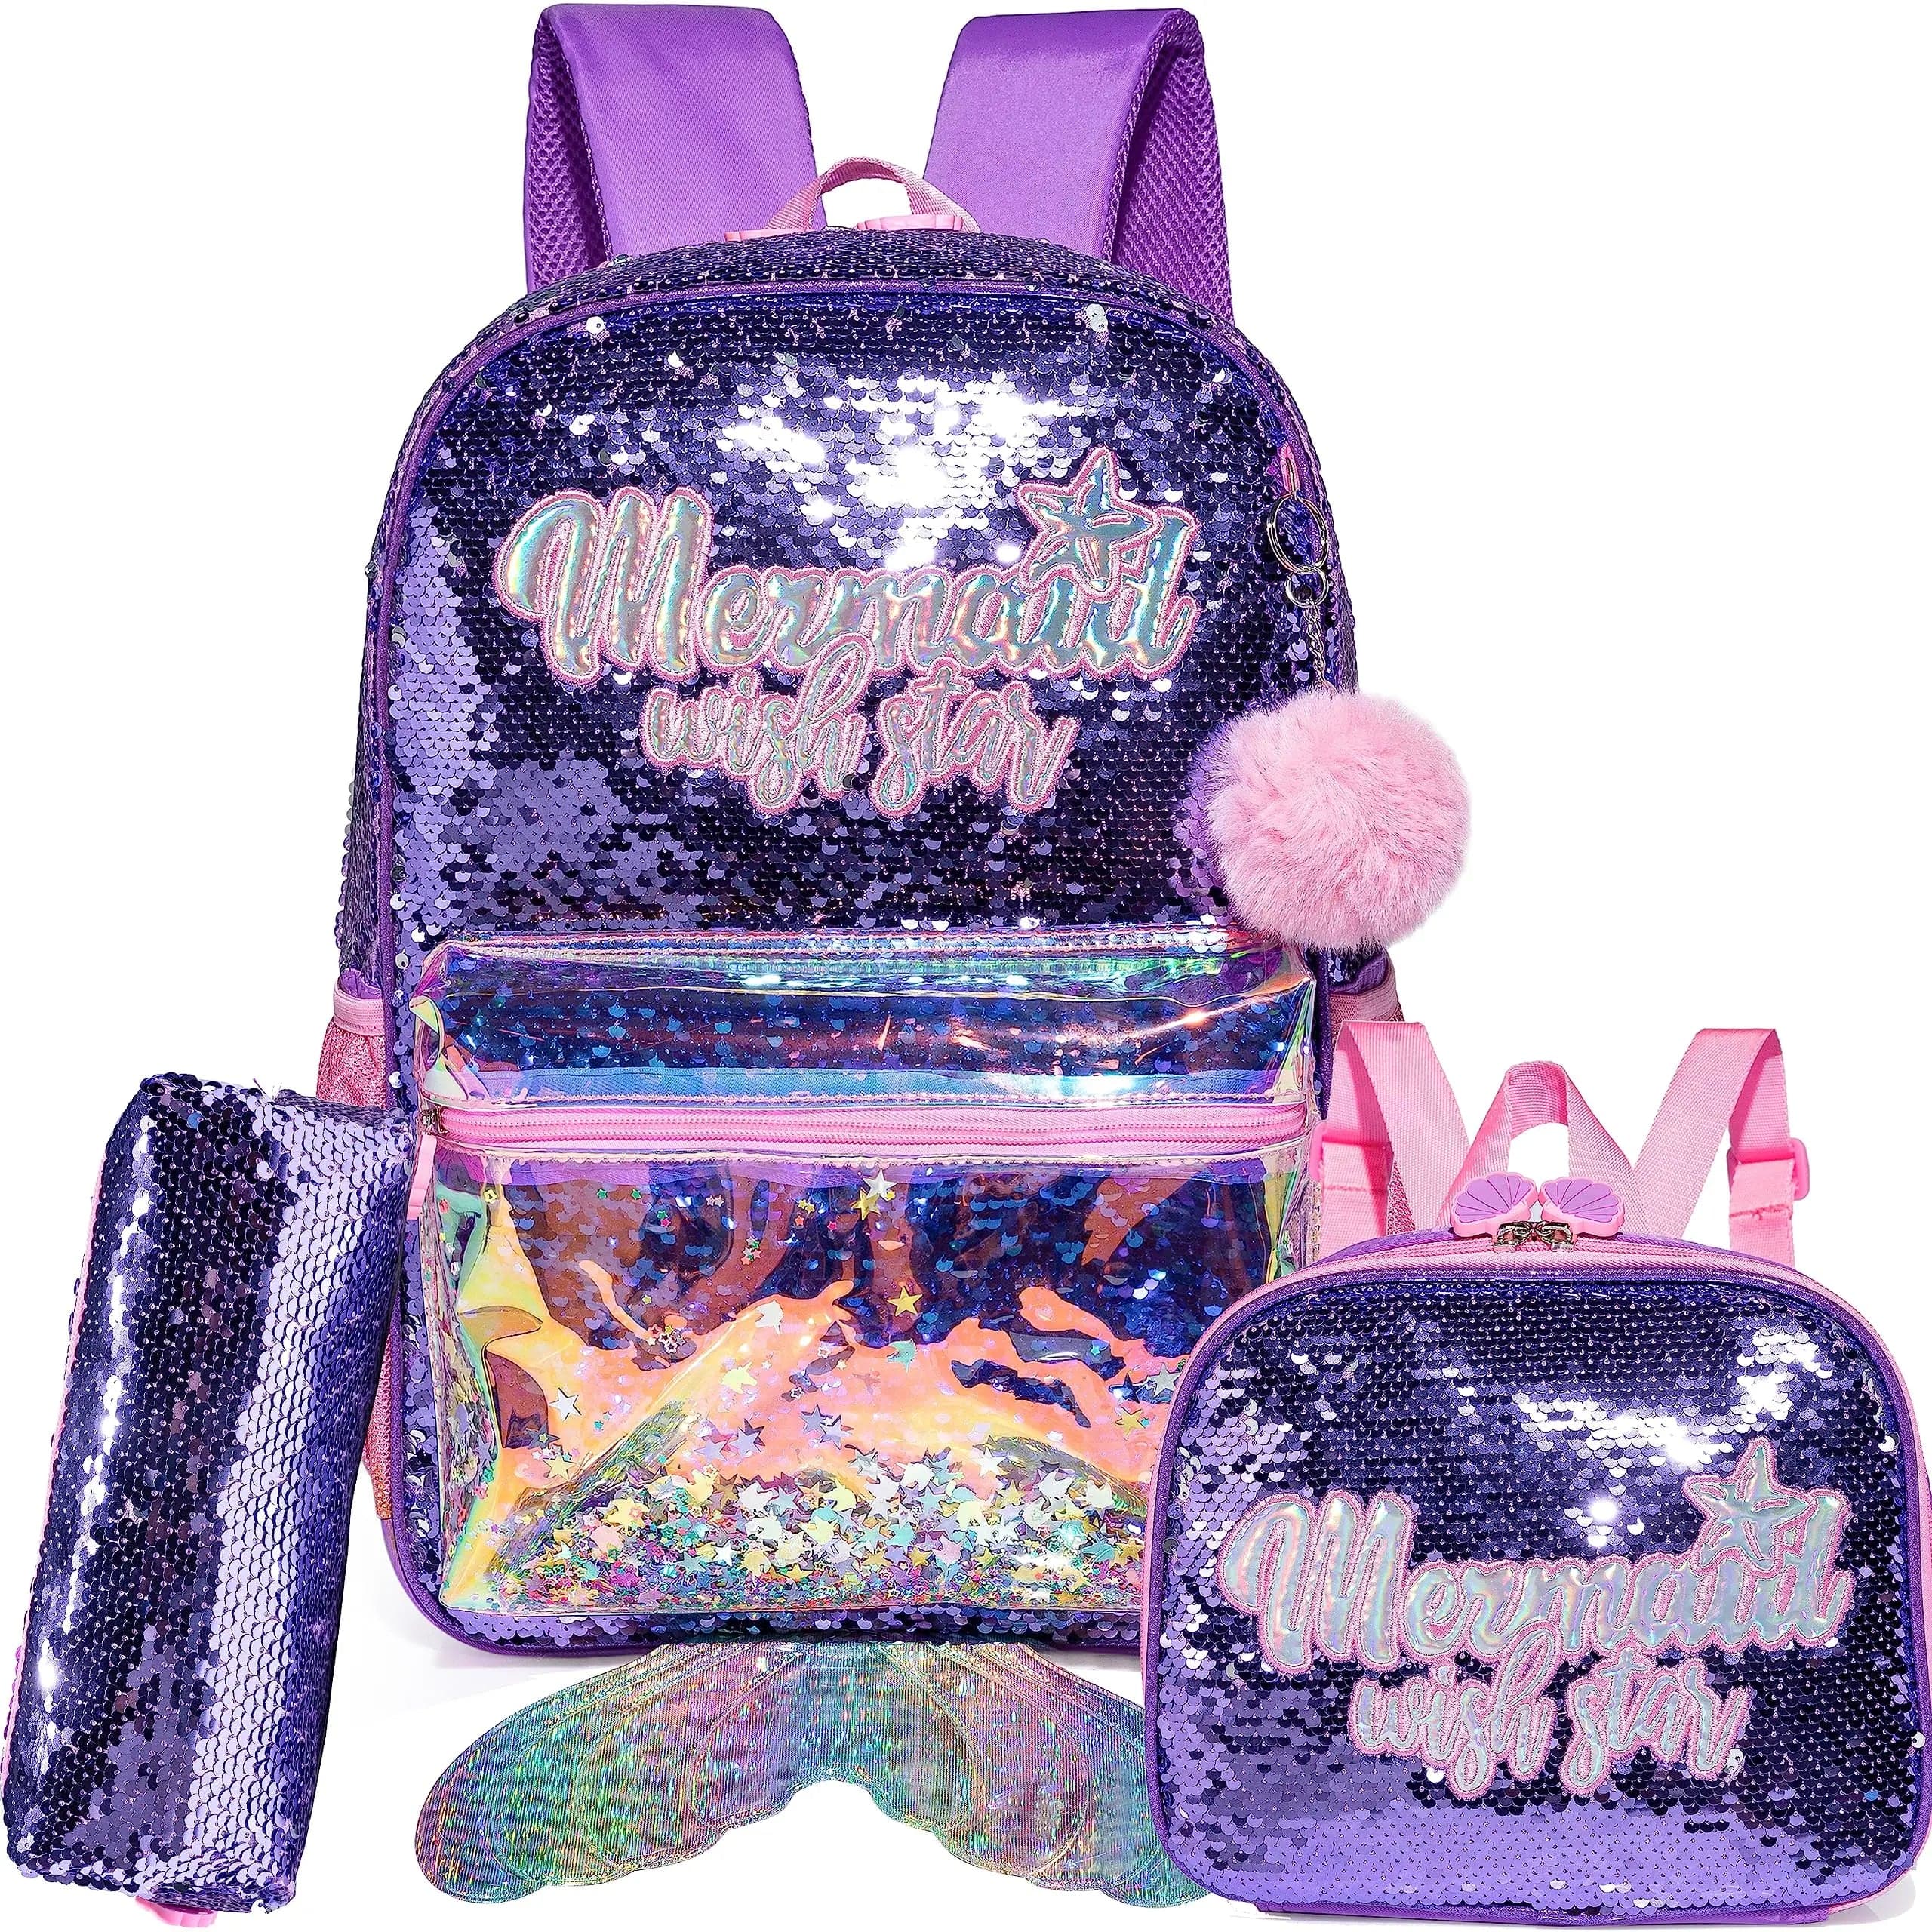 Cute Sequin Backpack Set for Girls - Ideal for School, Kindergarten, with Lunch Box & Pencil Case zhupianlitimermaid